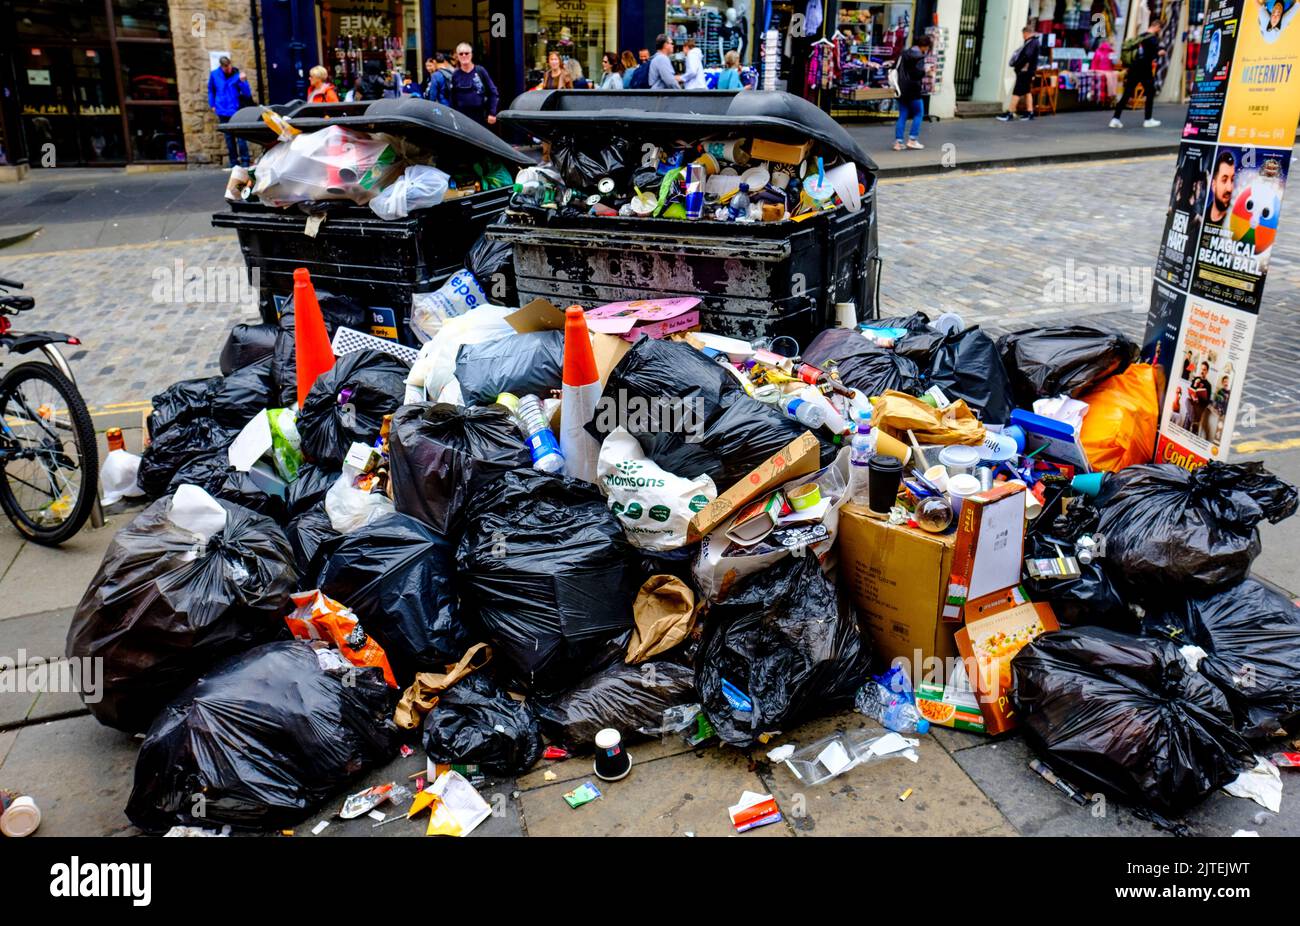 Rubbish piles up in the streets of Edinburgh, Scotland's capital city caused by a strike of the city's bin collectors. Stock Photo